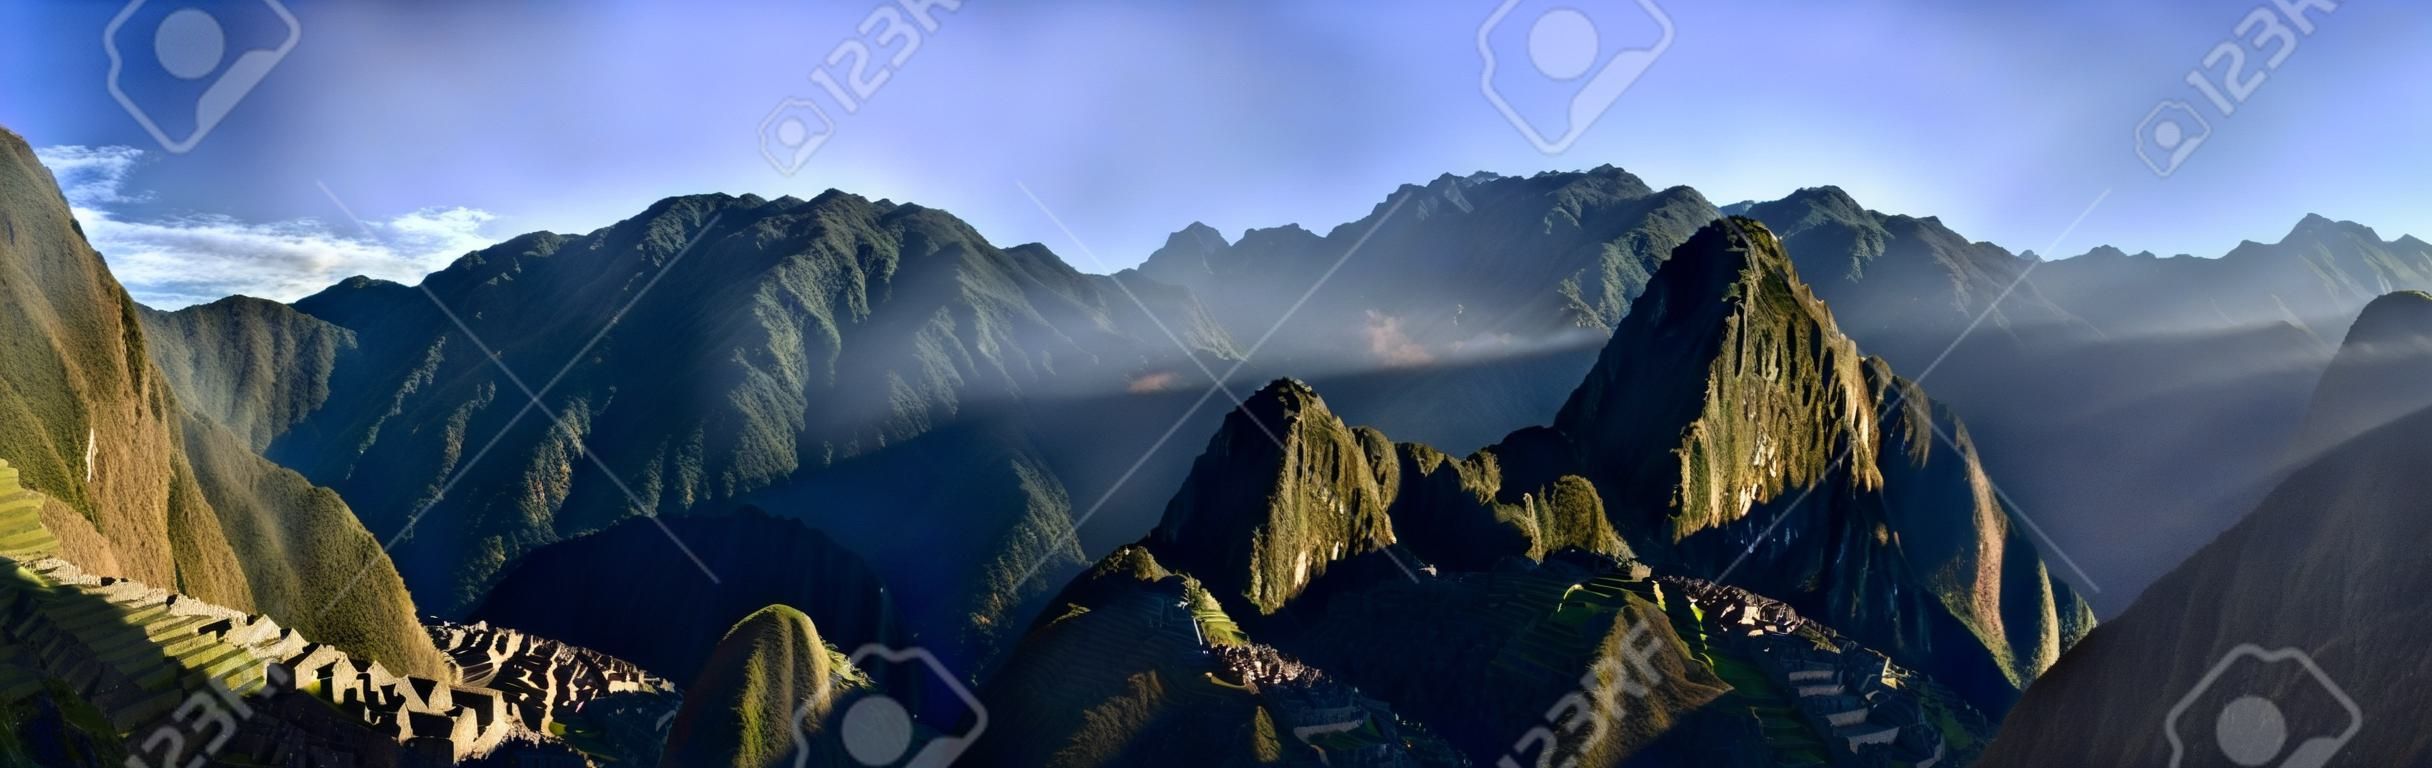 HDR Panorama of Sunrise over the Ruins Machu Picchu - Sacred city of the Incas